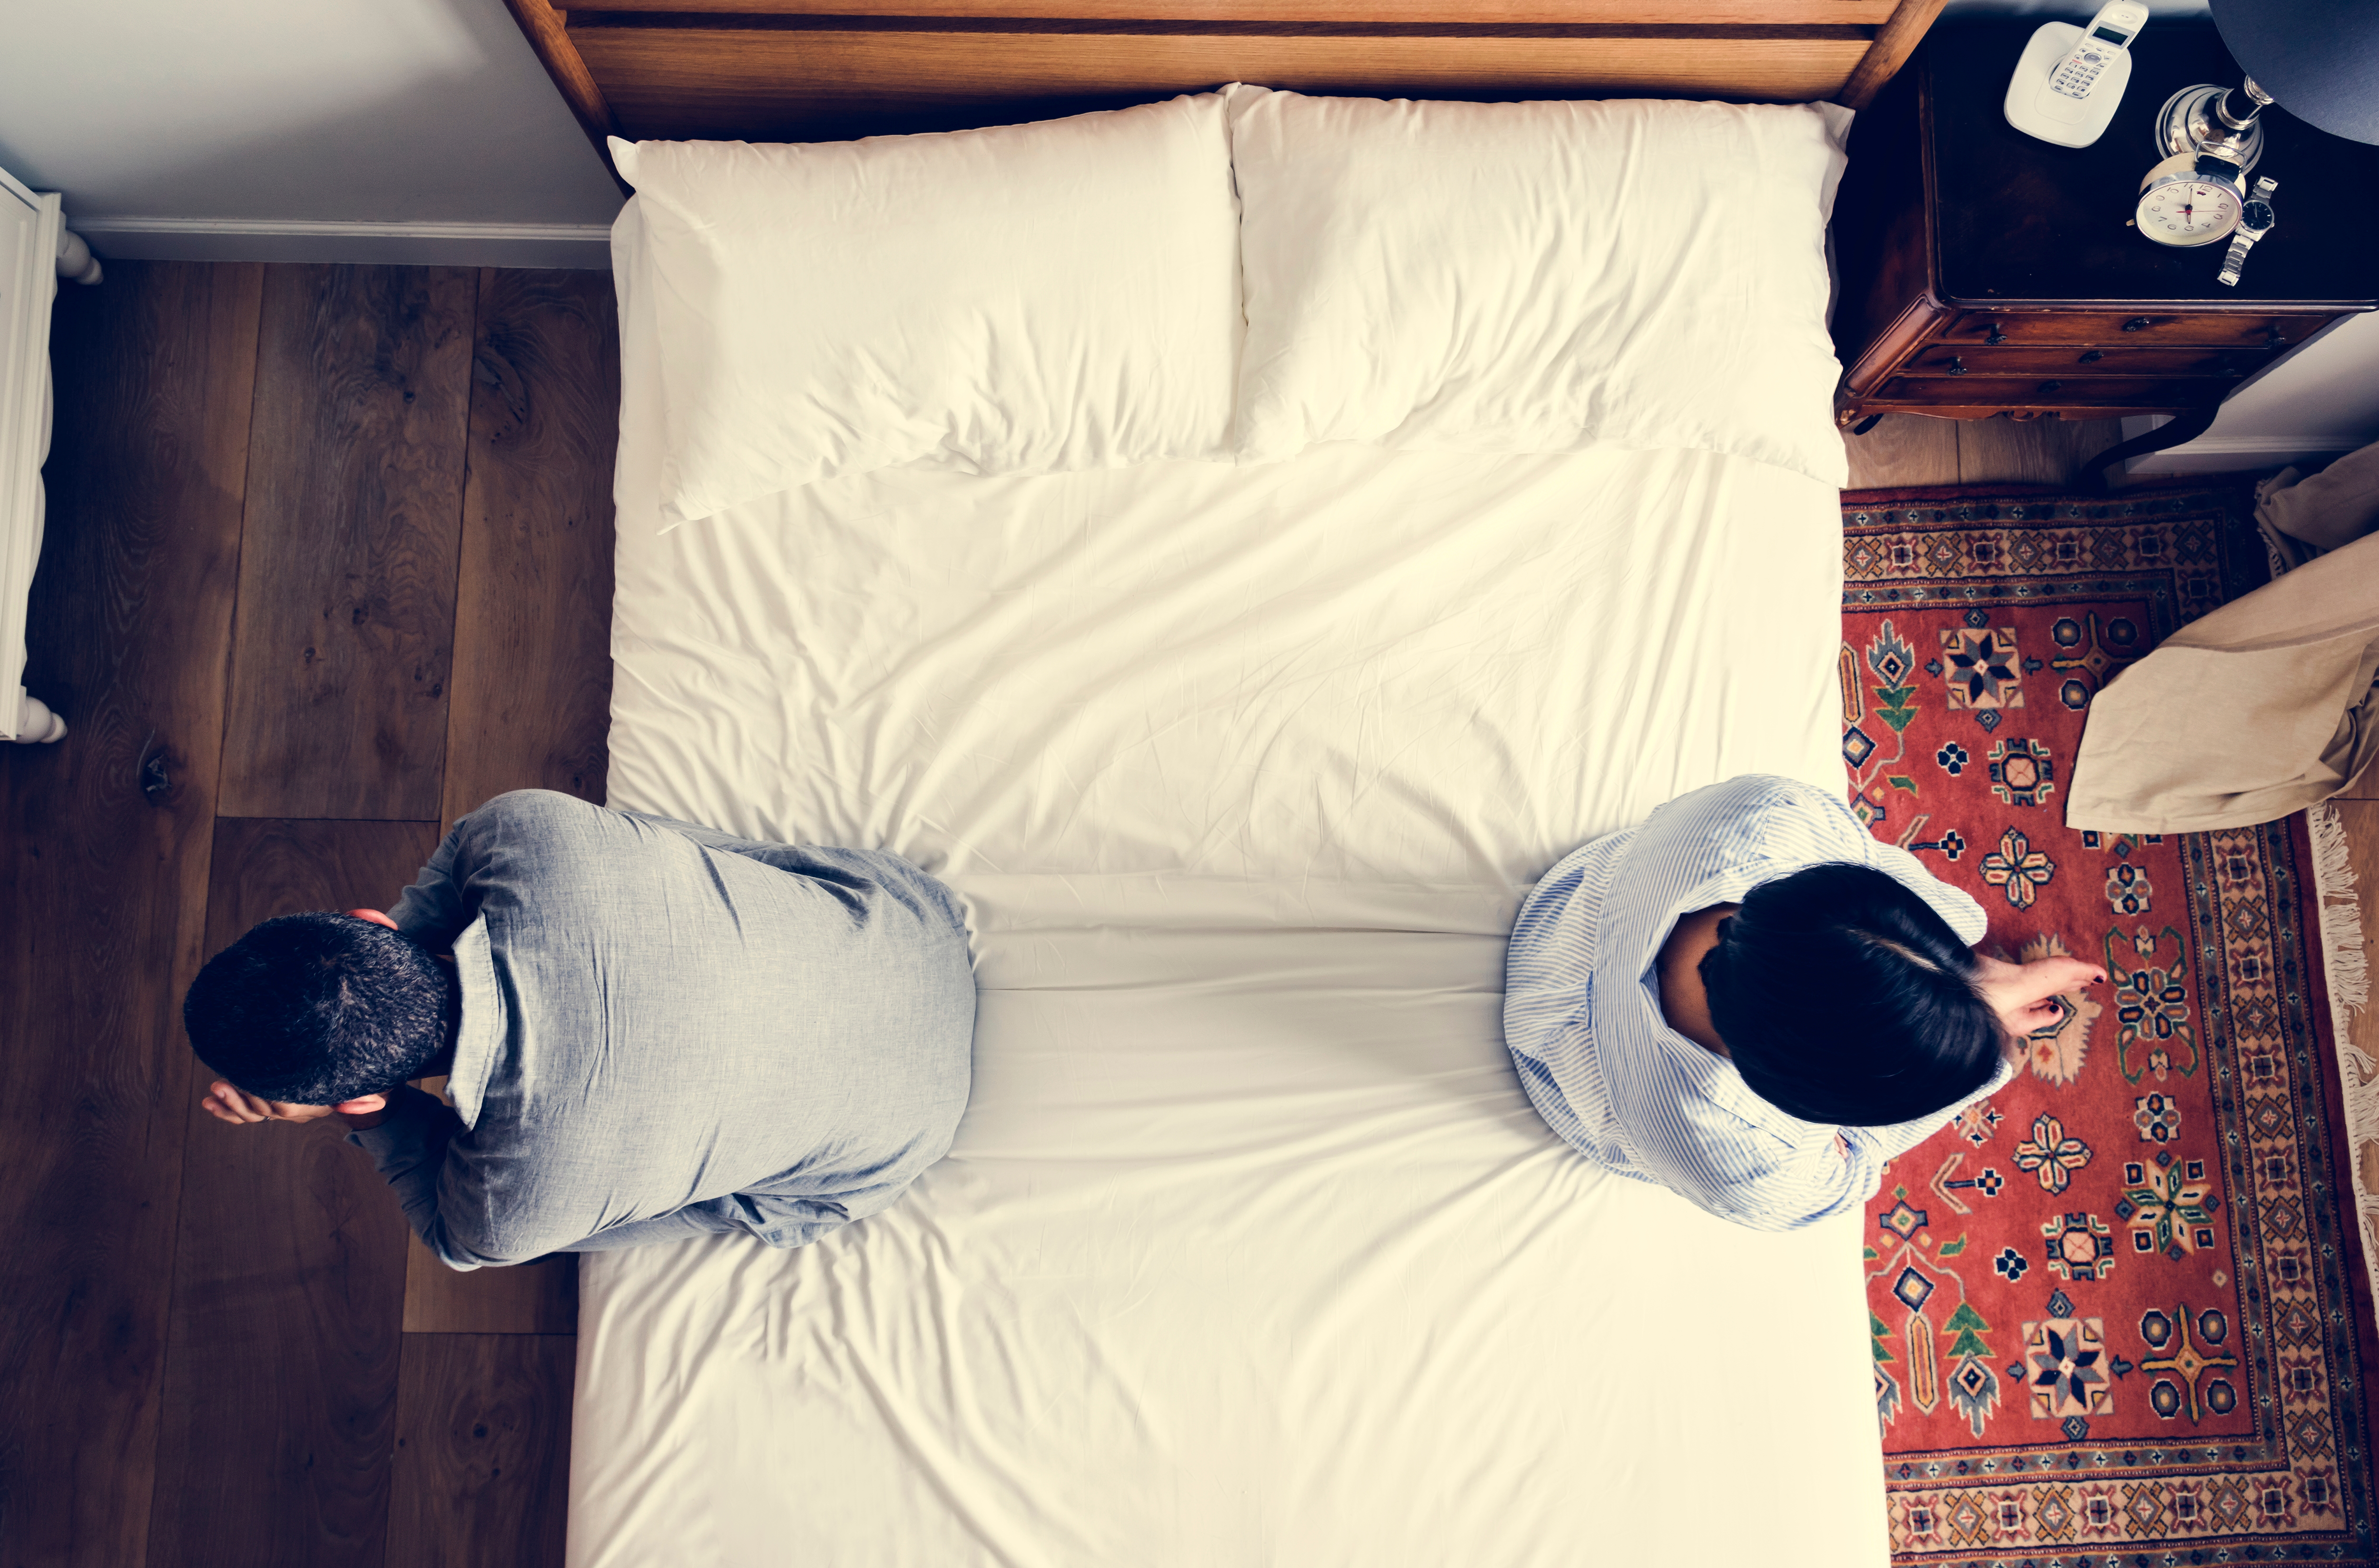 A couple sitting on opposite ends of their bed after an argument | Source: Shutterstock